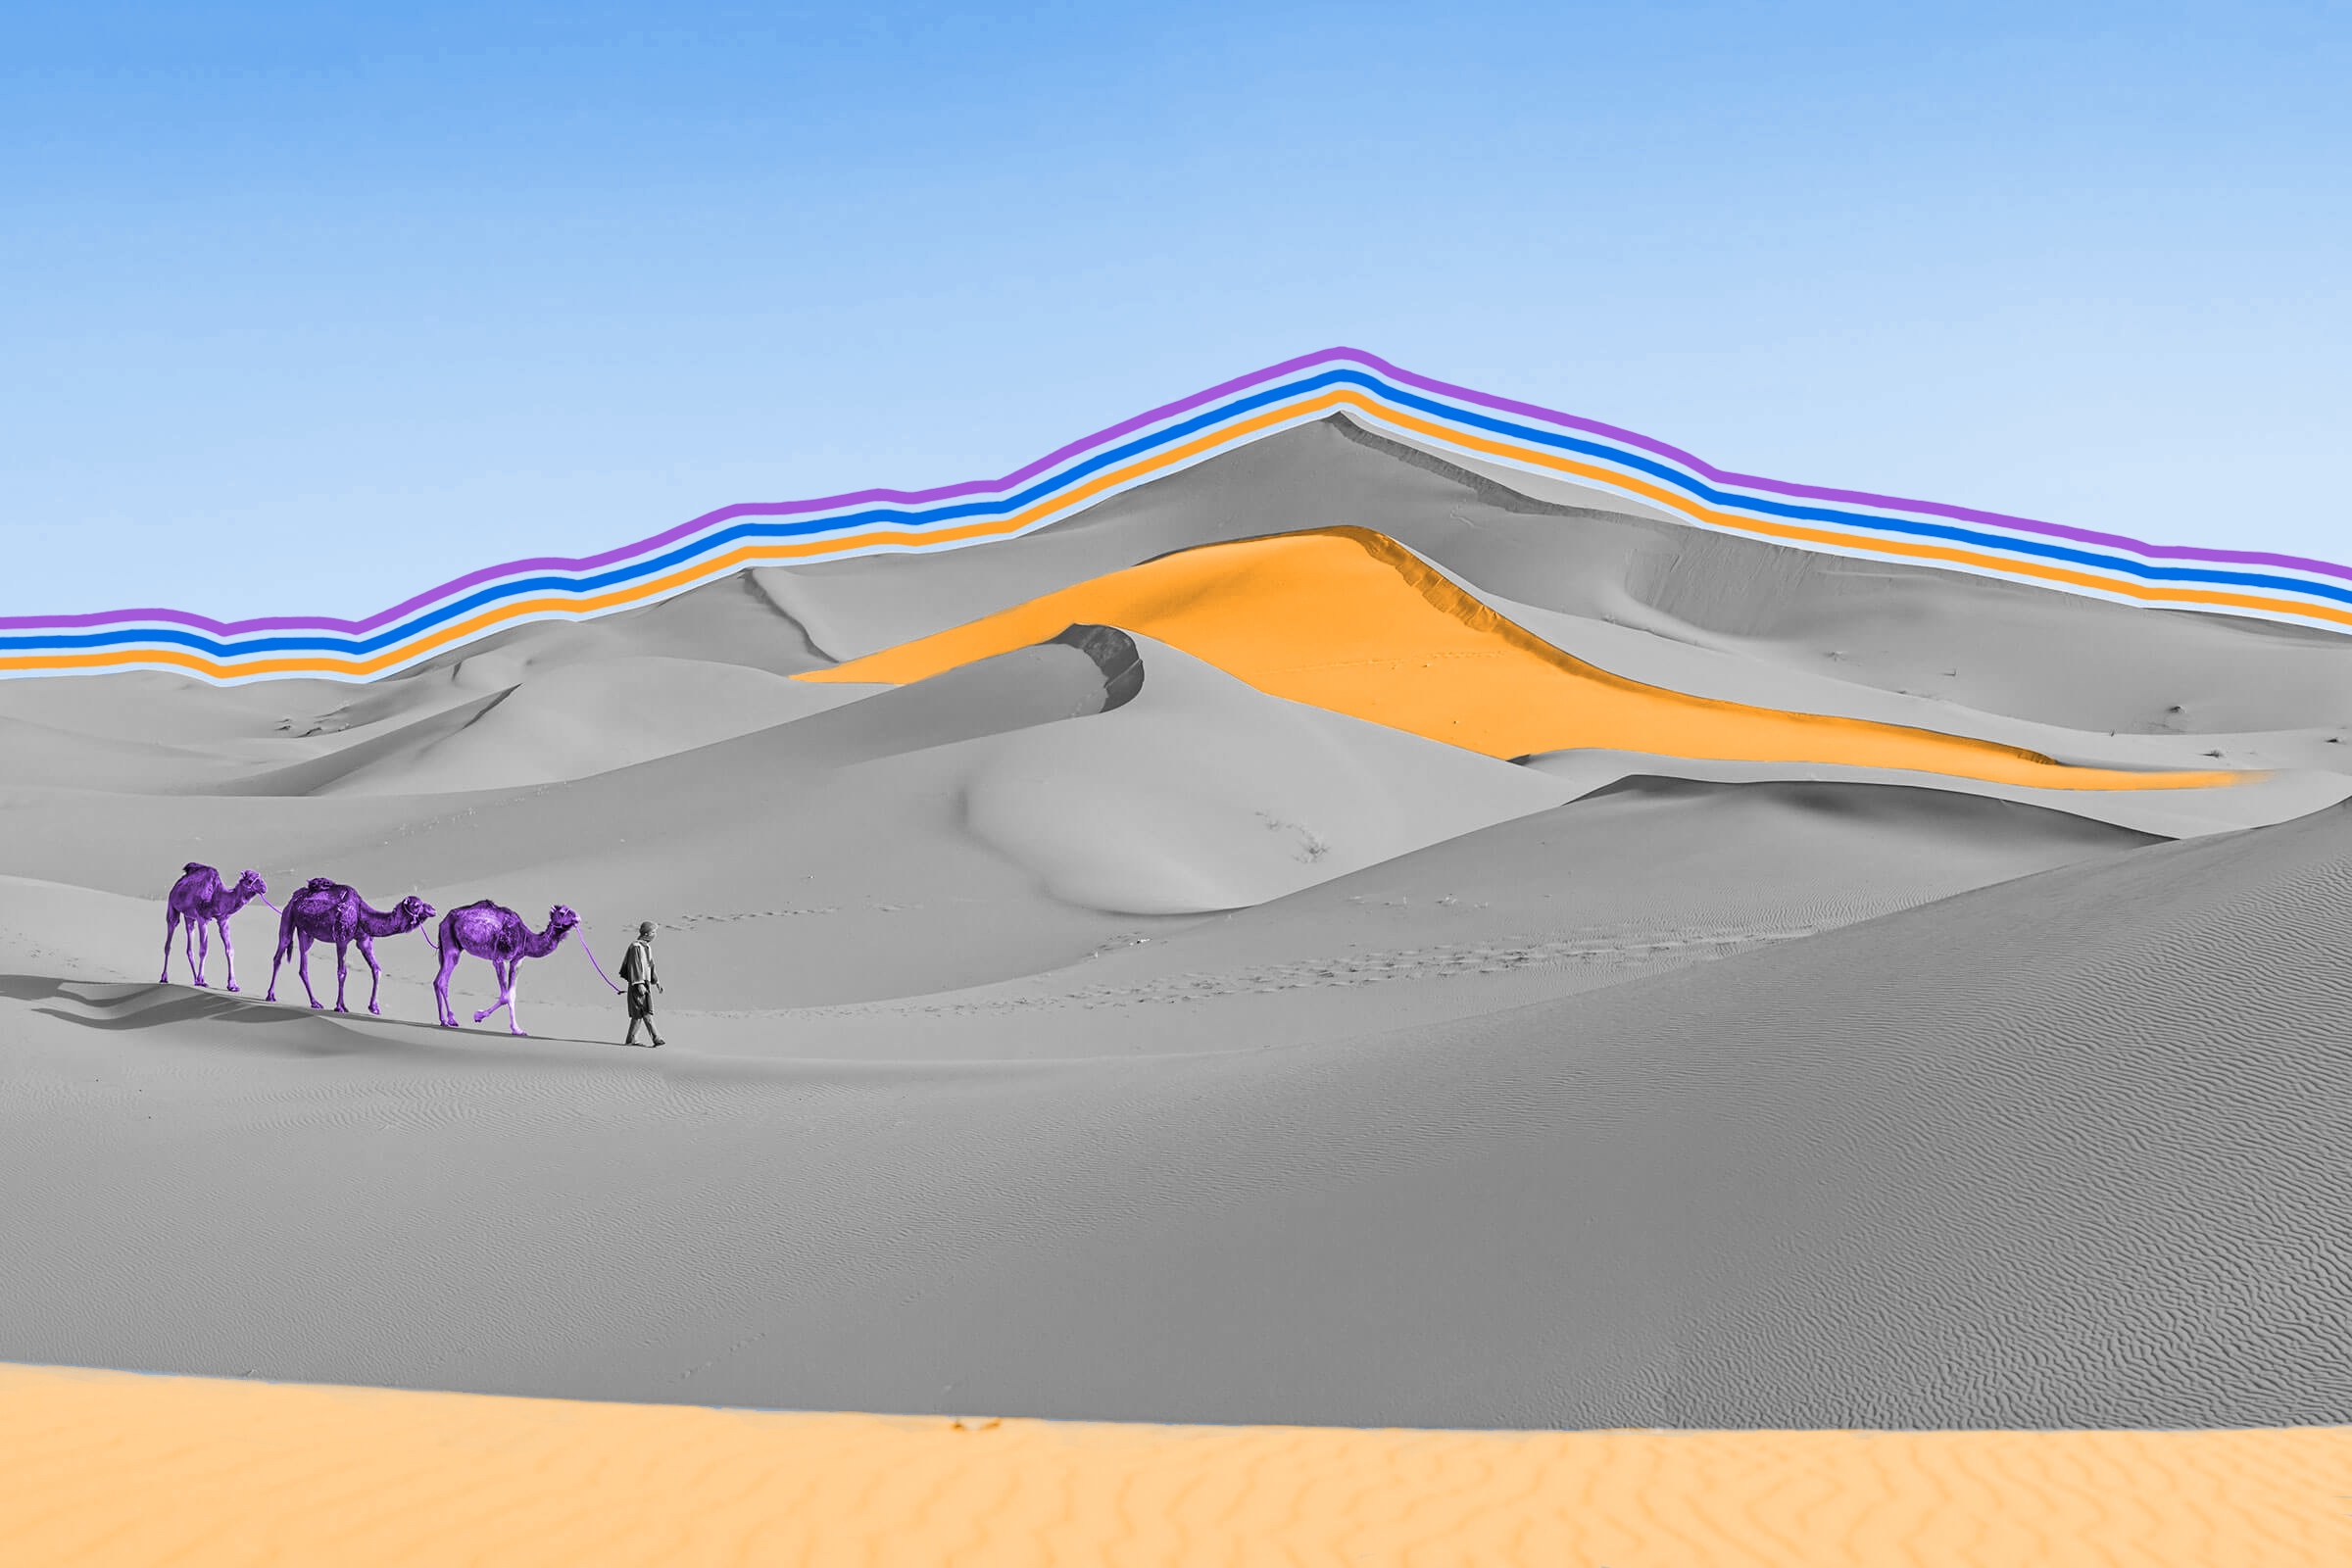 Sand dunes can “sing.”